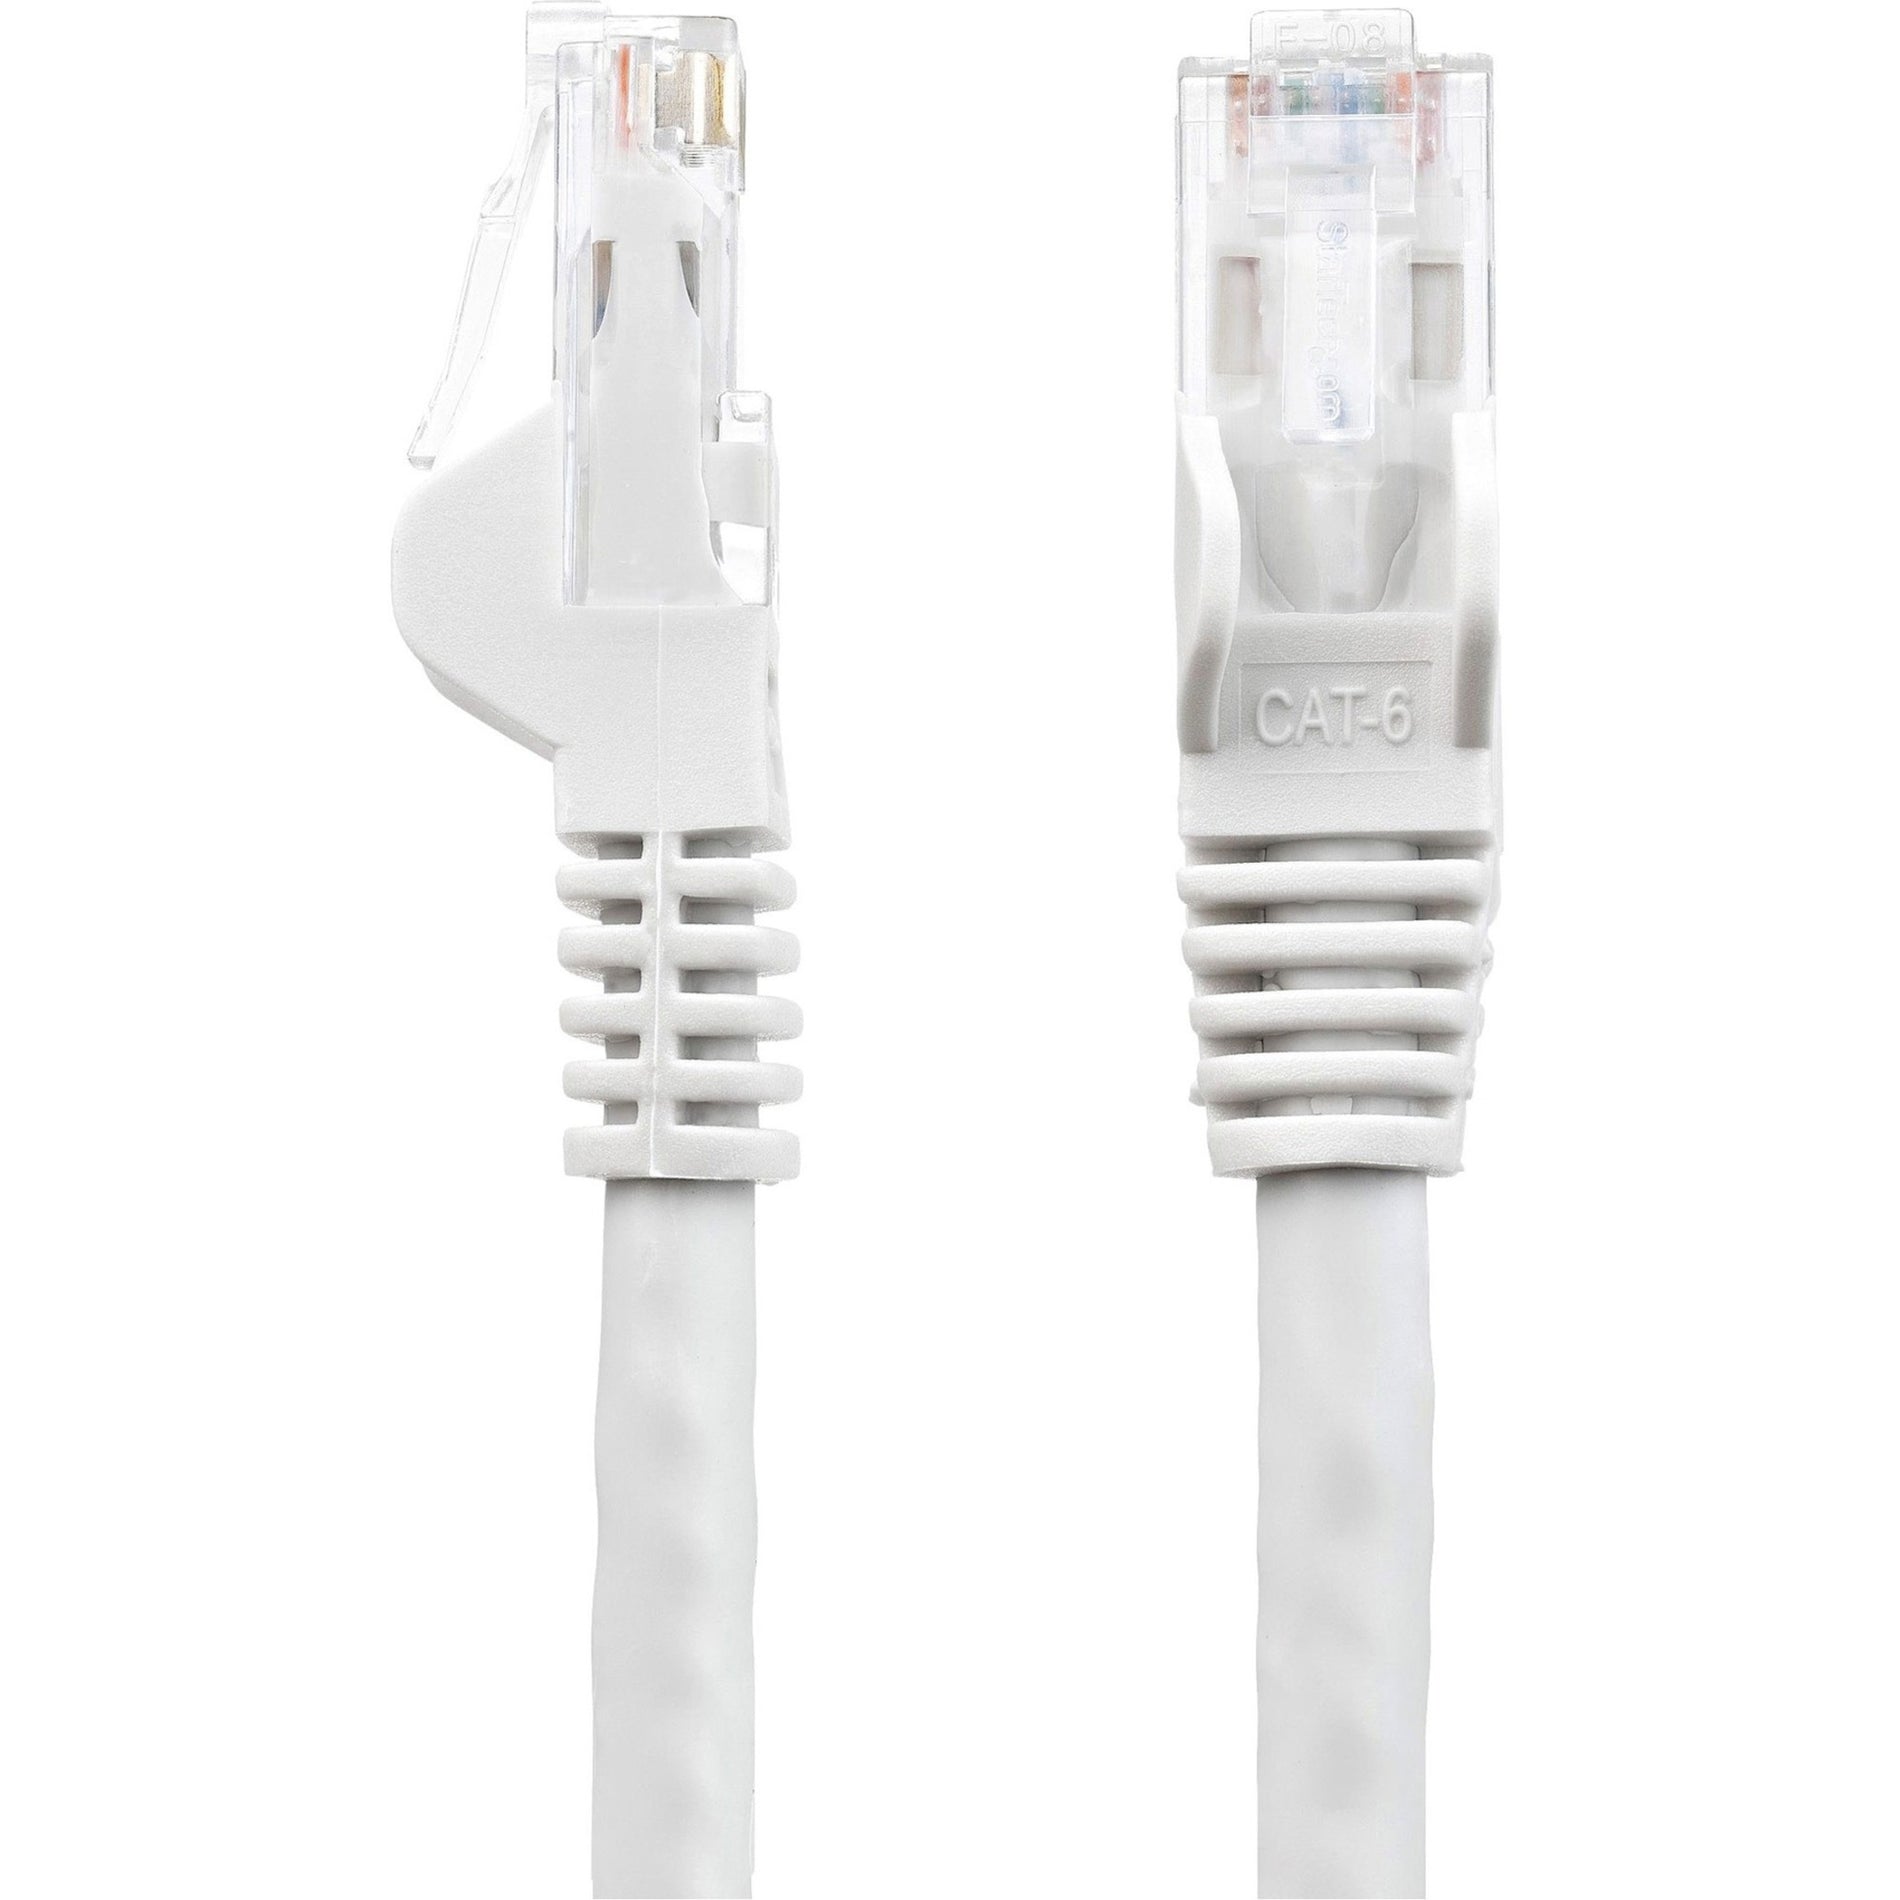 StarTech.com N6PATCH6INWH Cat6 Patch Cable, 6in White, Short Ethernet Cable